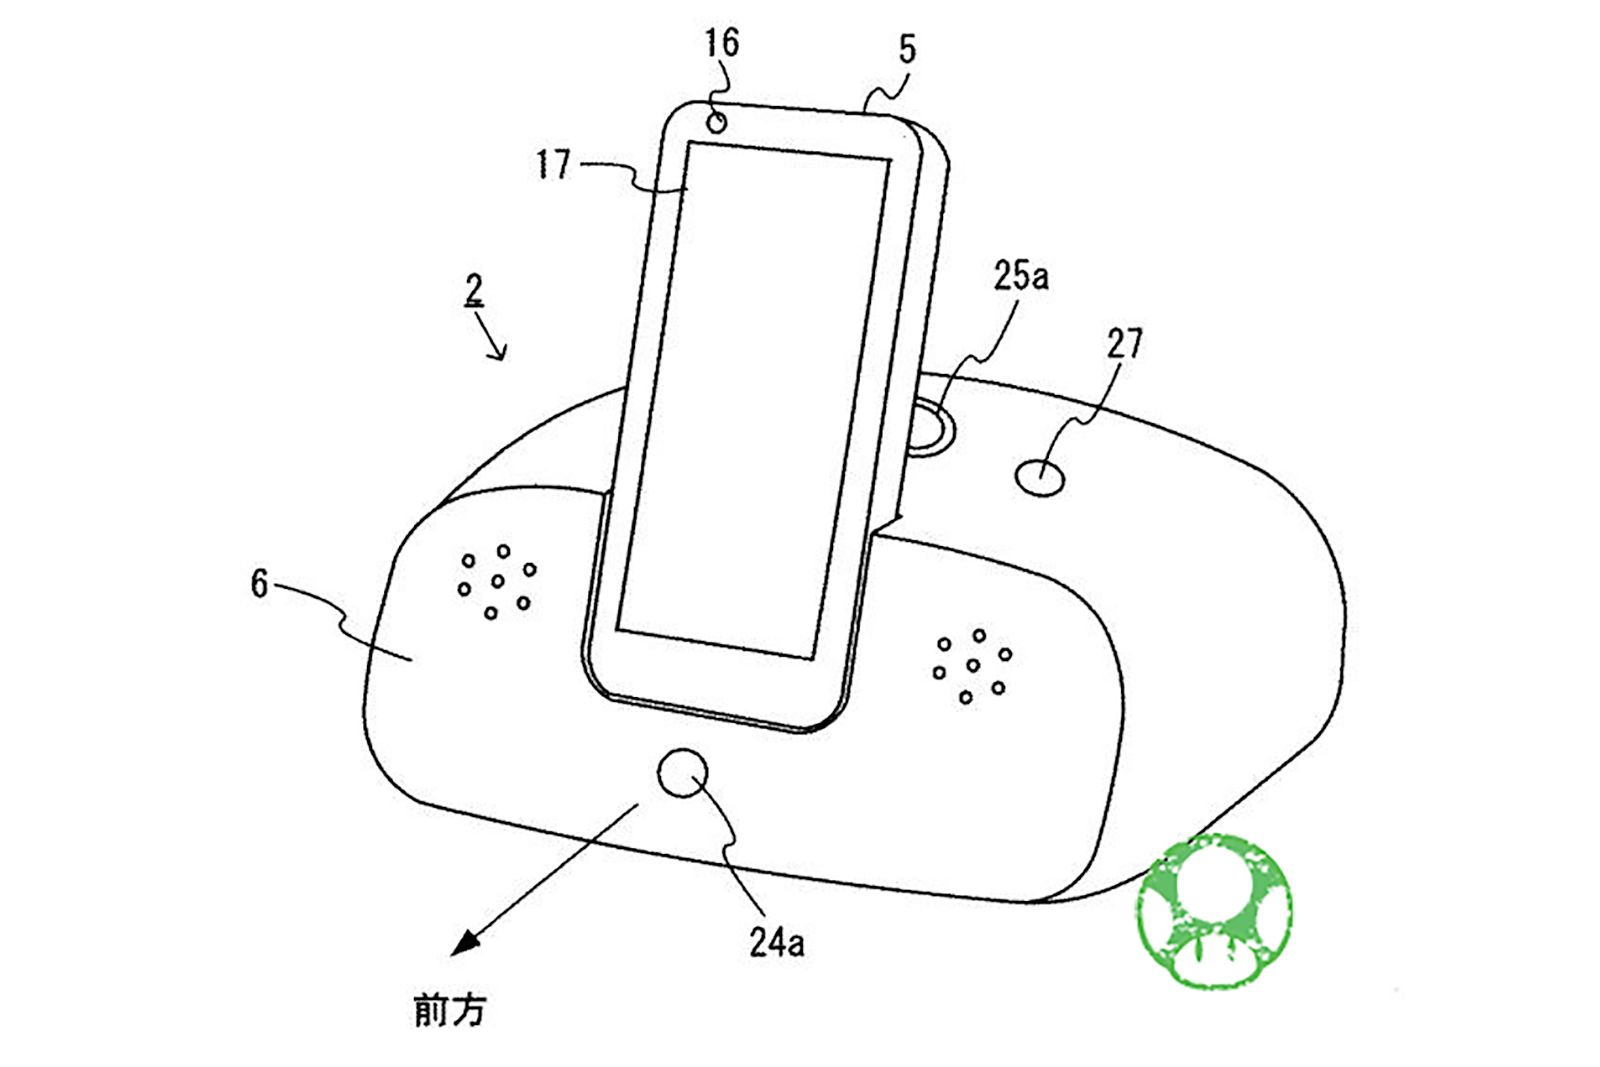 Nintendos Not Yet Given Up On Quality Of Life Devices New Sleep Tracker Patent Found image 2